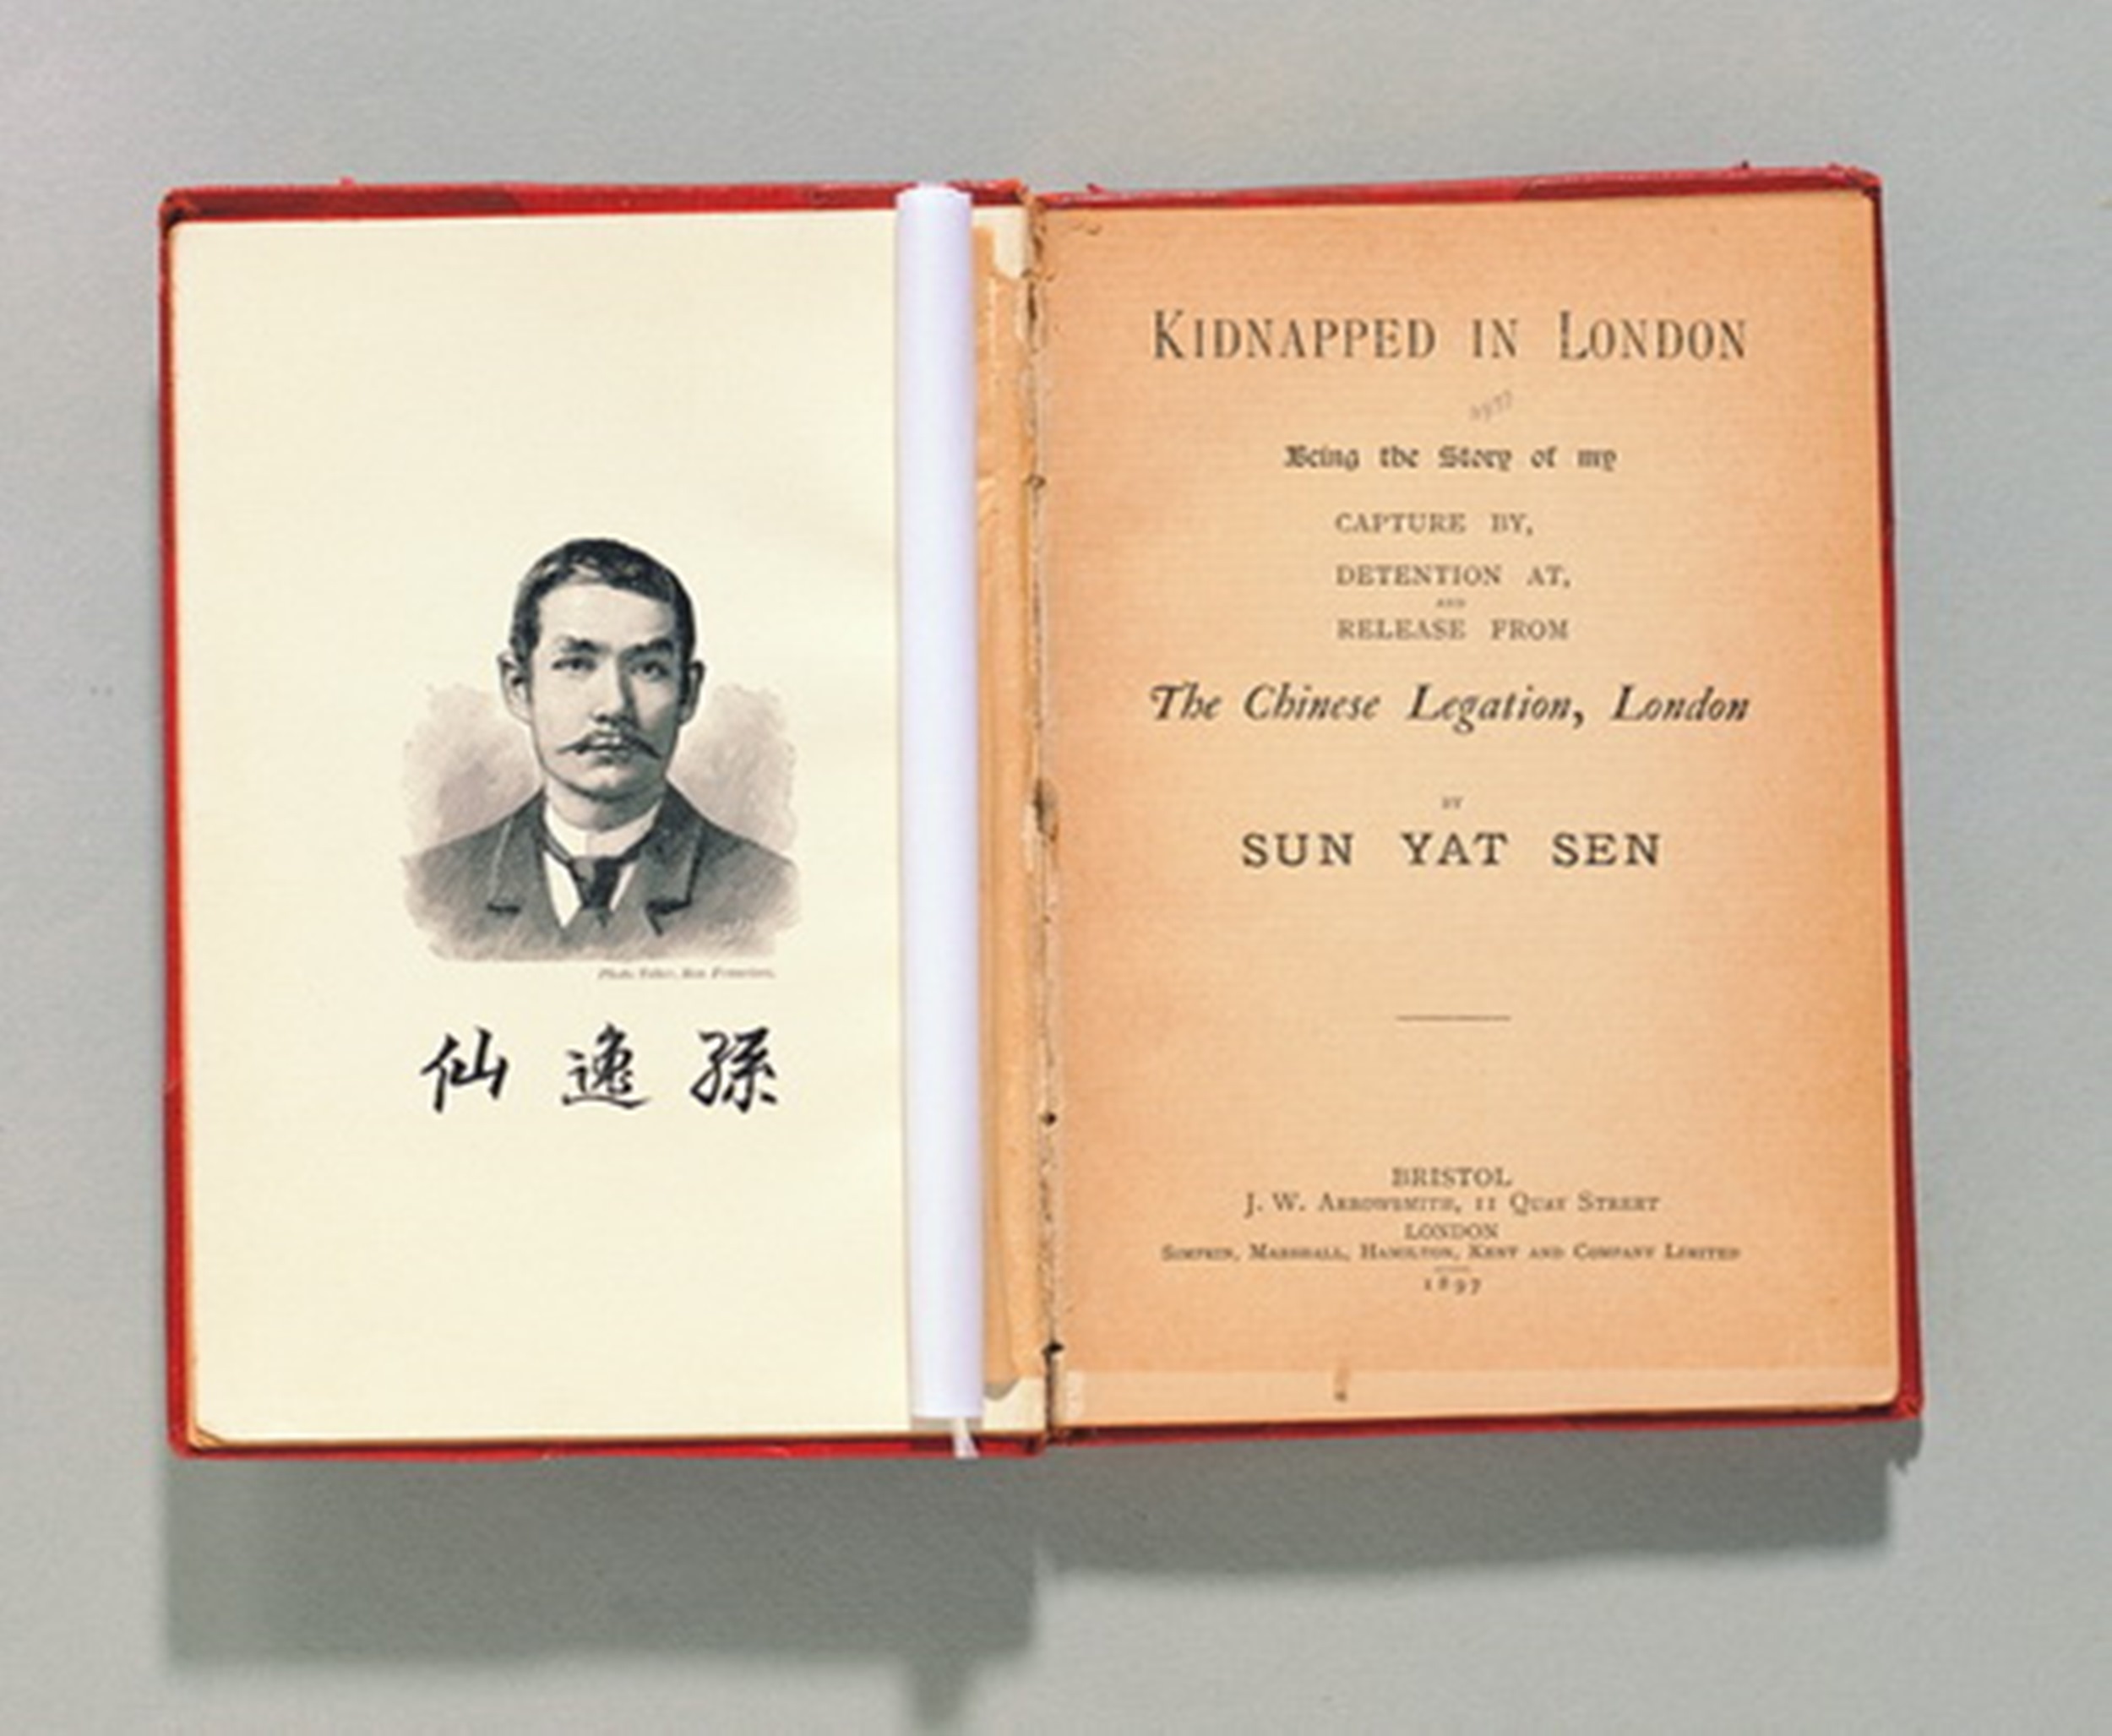 The first edition of Kidnapped in London, 1897. Donated by Mr Chan Cheong Yui